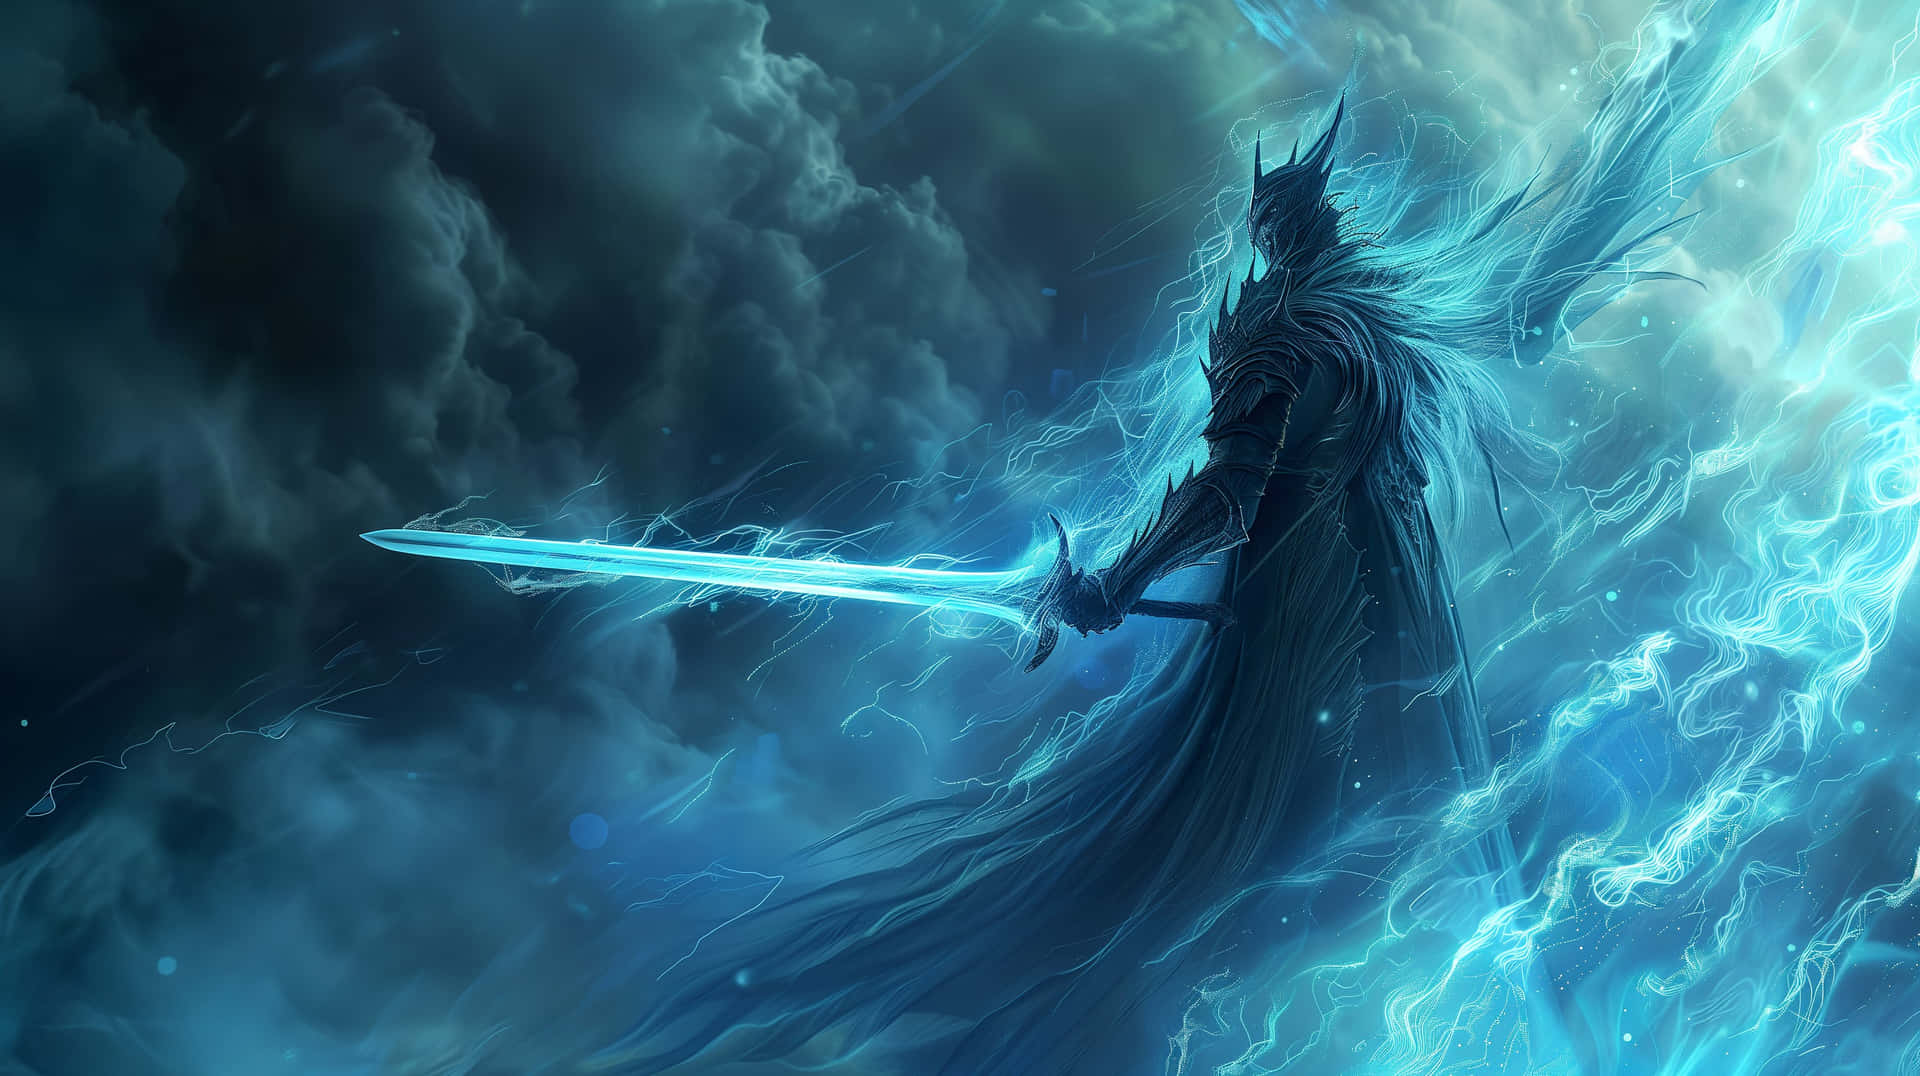 Mystical_ Sorcerer_with_ Electric_ Blade Wallpaper